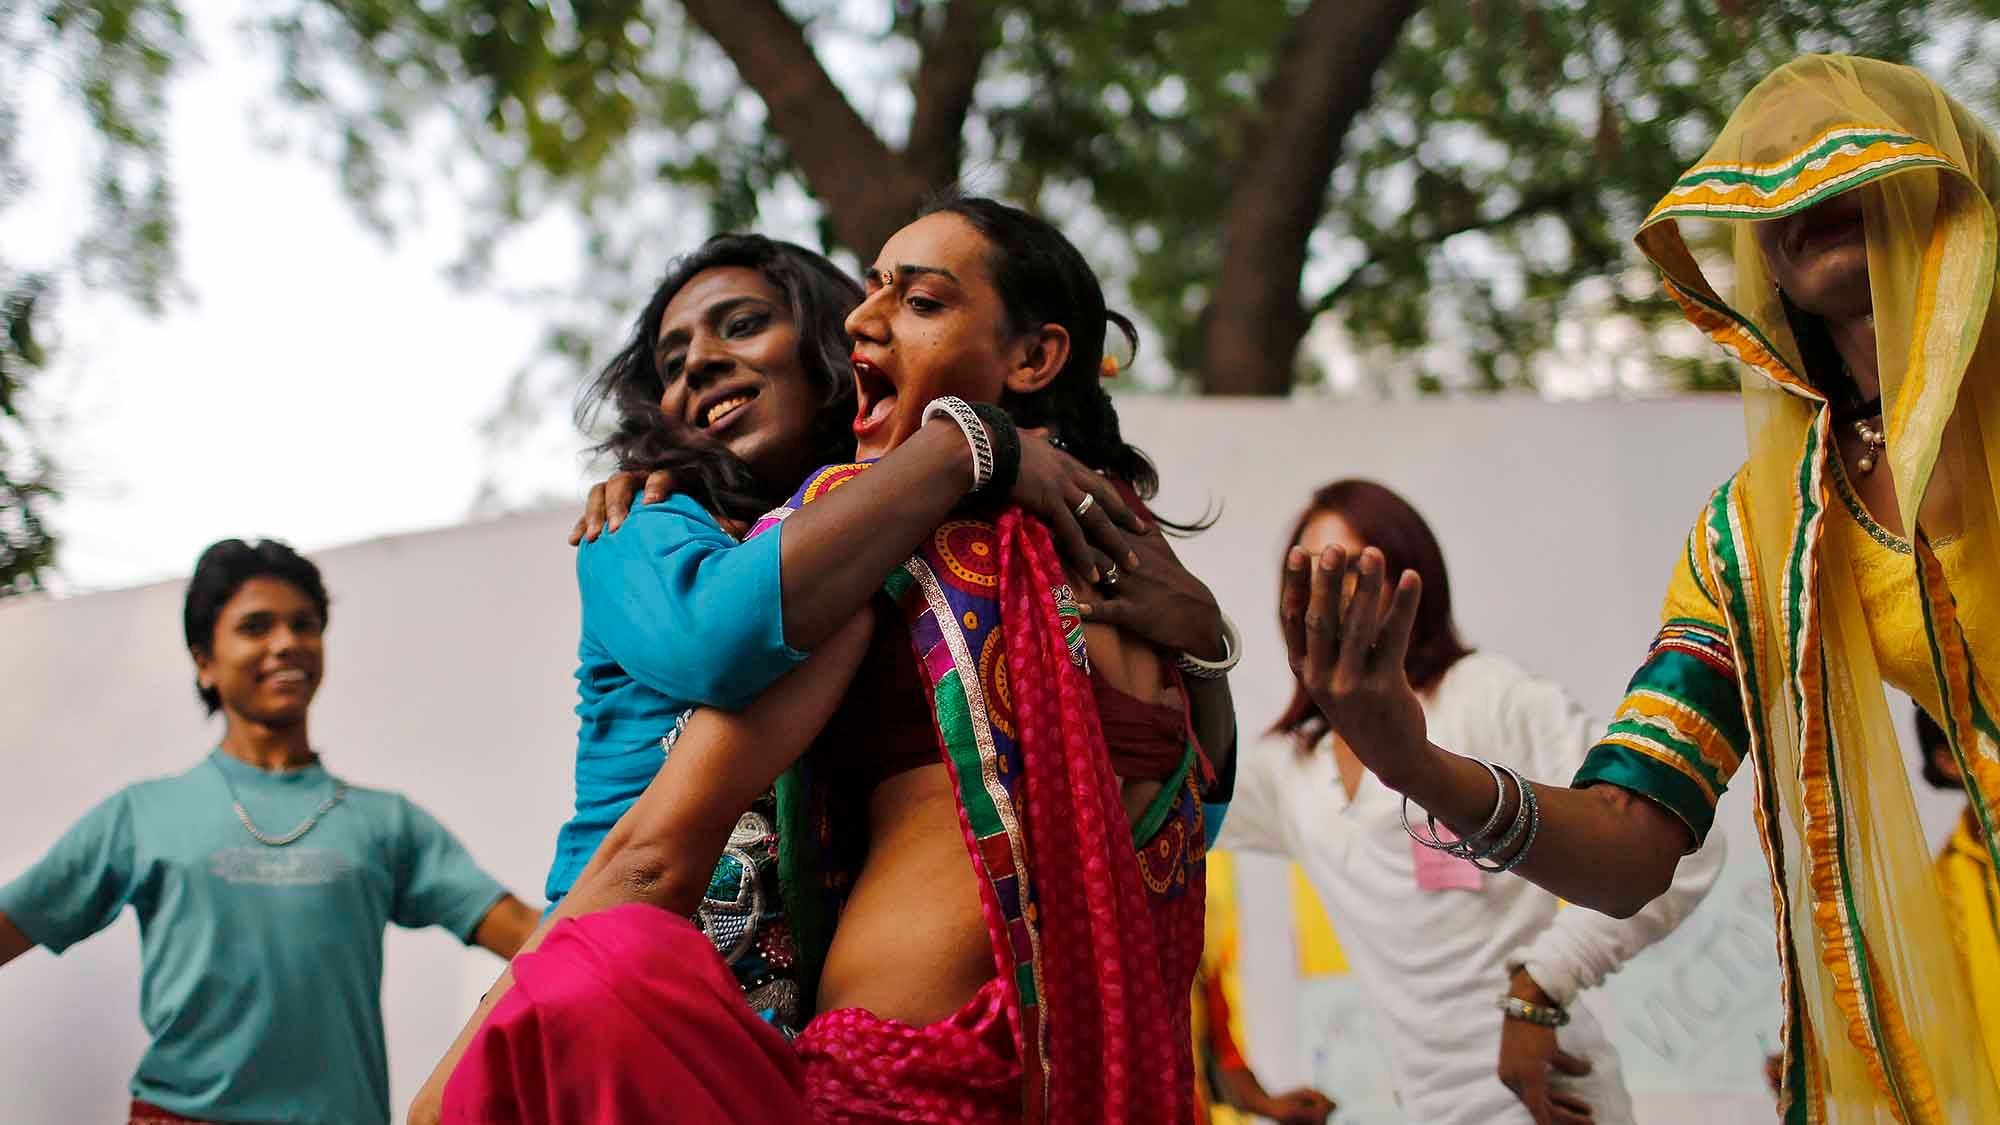 After SC’s landmark judgement last year, Tamil Nadu gives transgender persons another reason to celebrate. (Photo: Reuters)